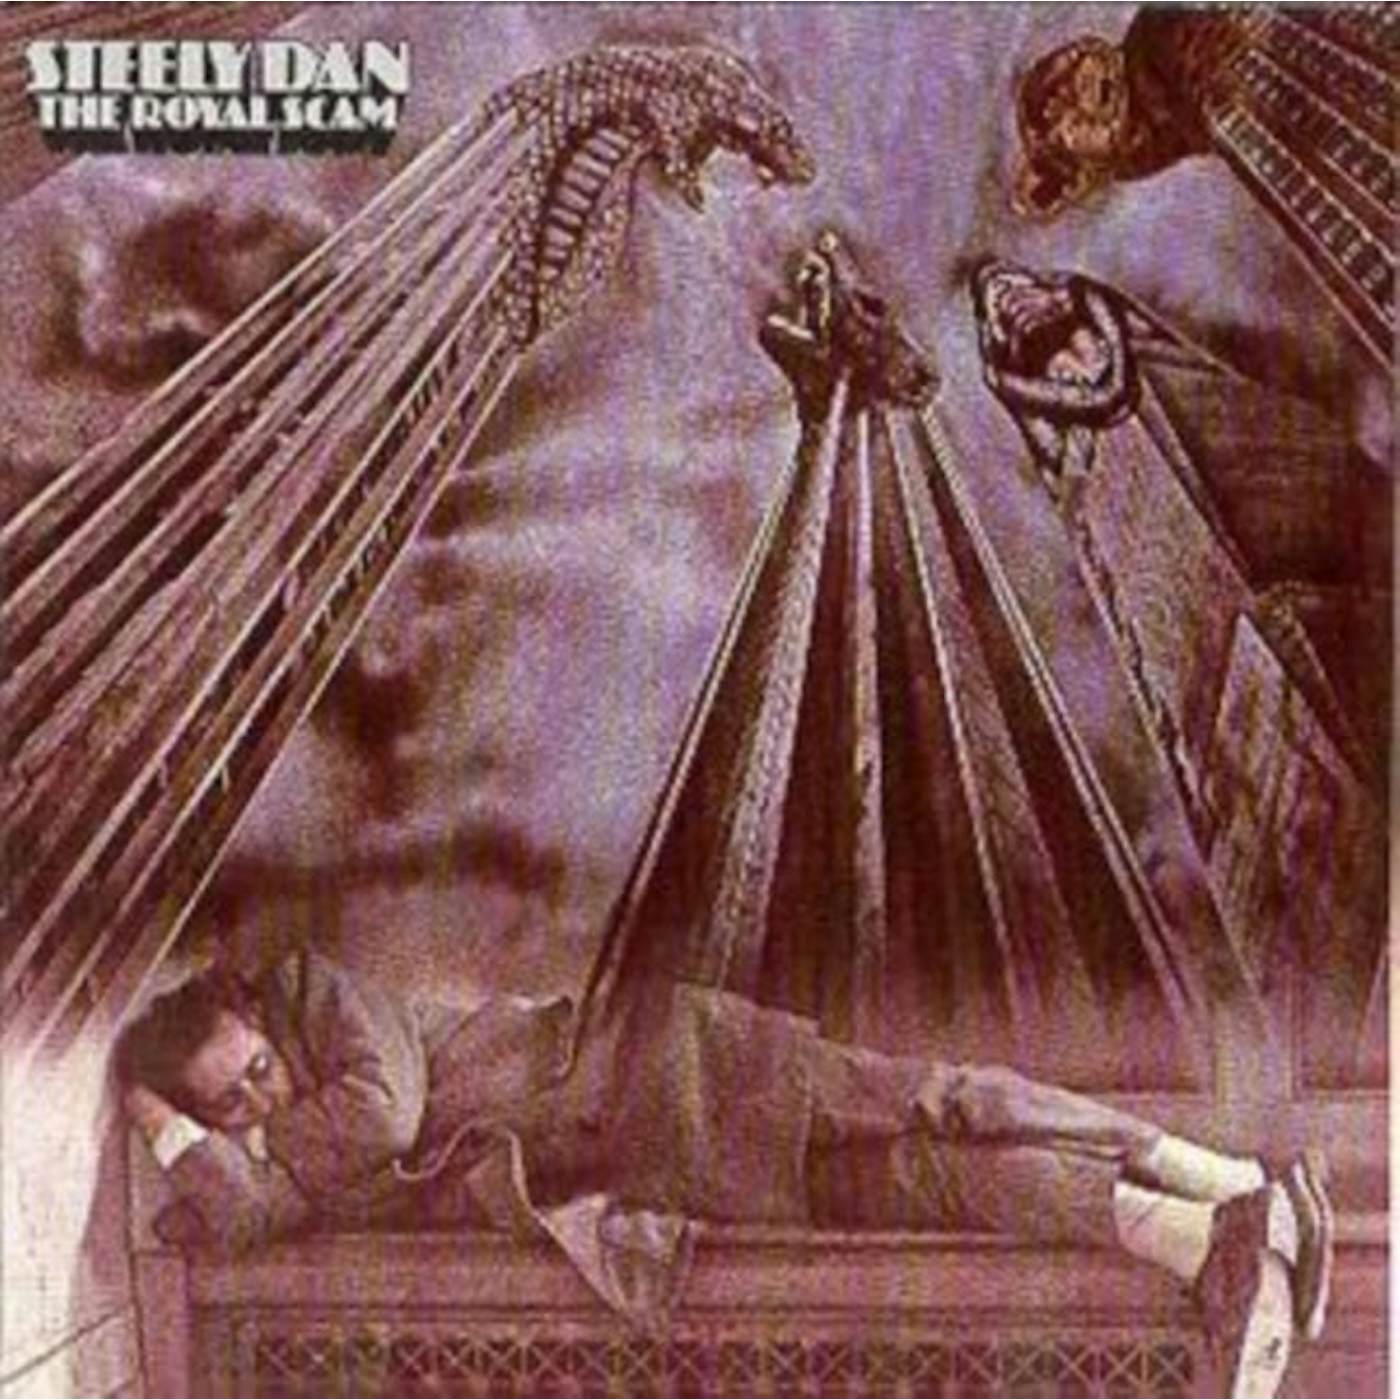 Steely Dan CD - The Royal Scam